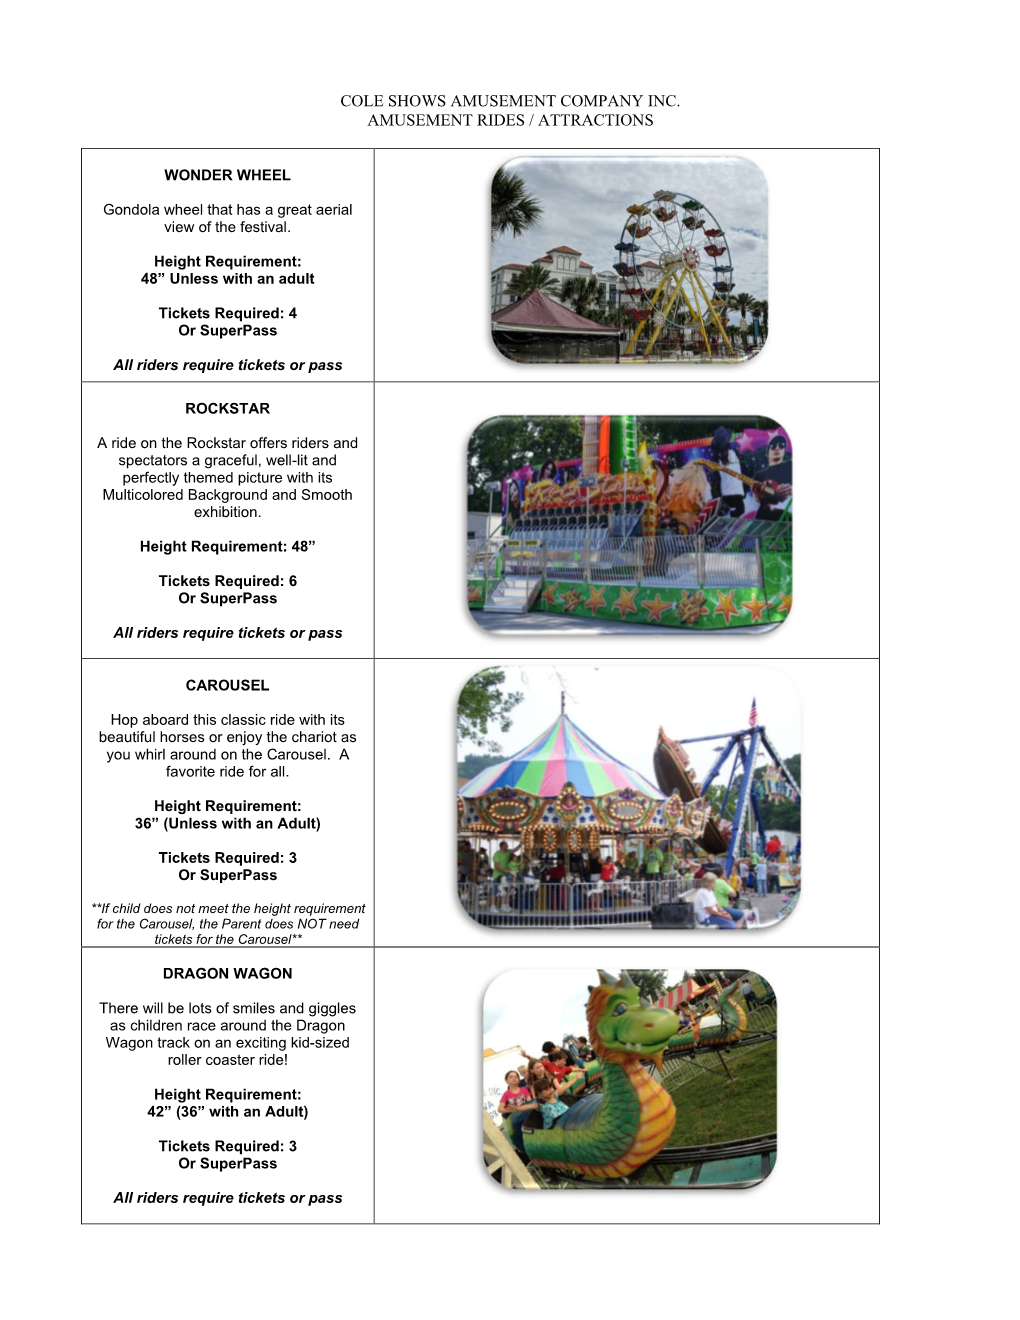 Please View Our Kidway Midway Ride Guide by Clicking Here